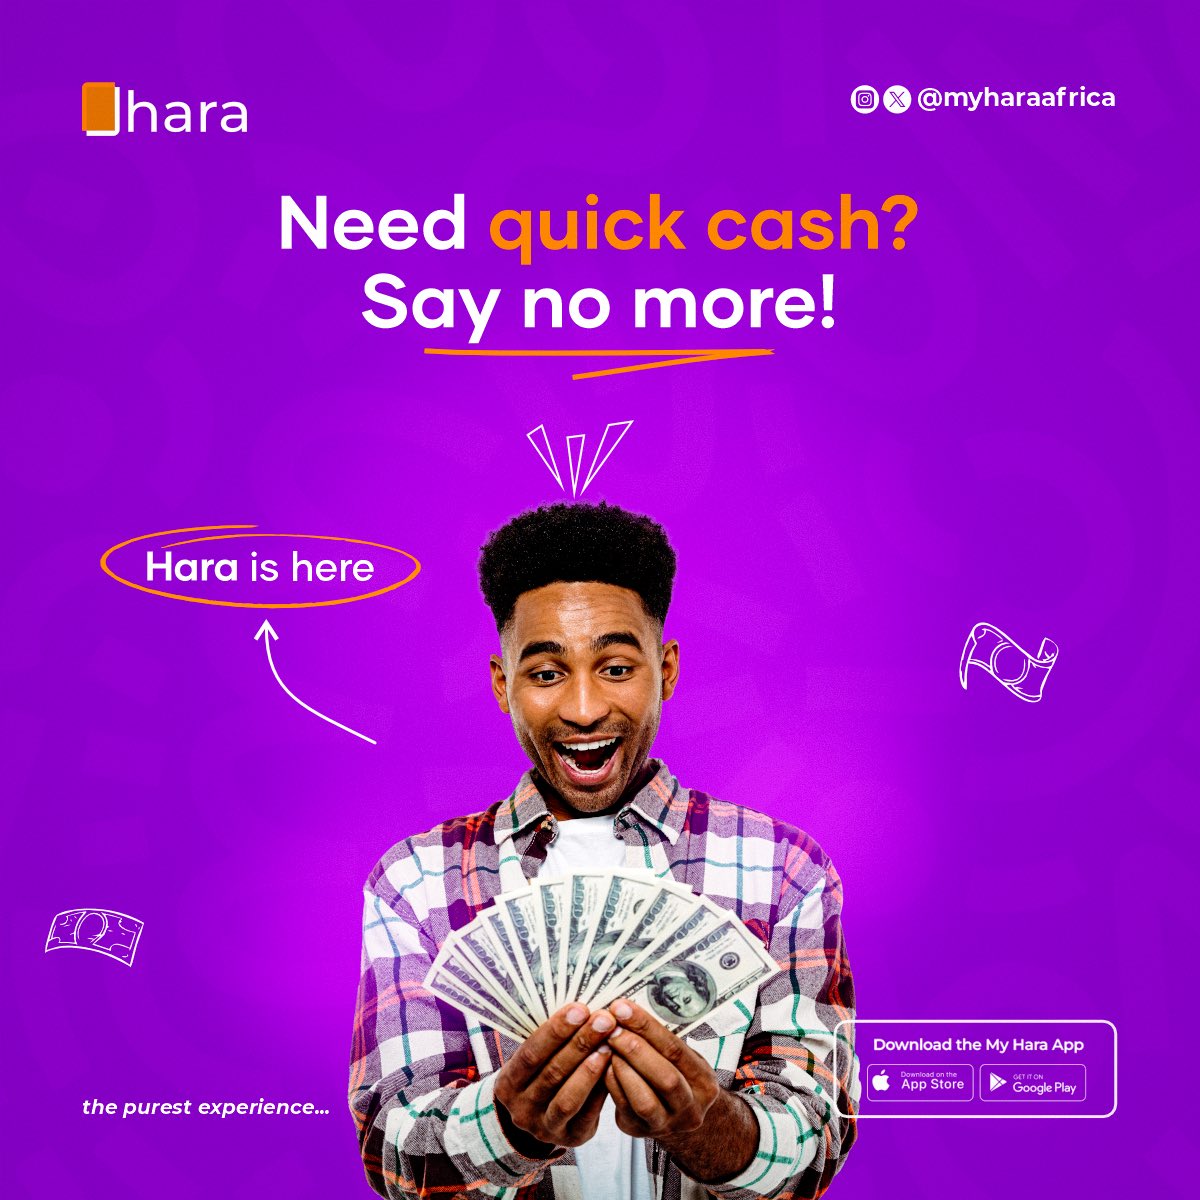 Get instant cash when you trade your Gift cards with us.

#Hara #GiftCardExchange #GiftCardTrading #GiftCardMarketplace #TradeGiftCards #BuyGiftCards #SellGiftCards #GiftCardDeals #GiftCardSwap #GiftCardResale #GiftCardOffers #GiftCardExchangePlatform #GiftCardCommunity